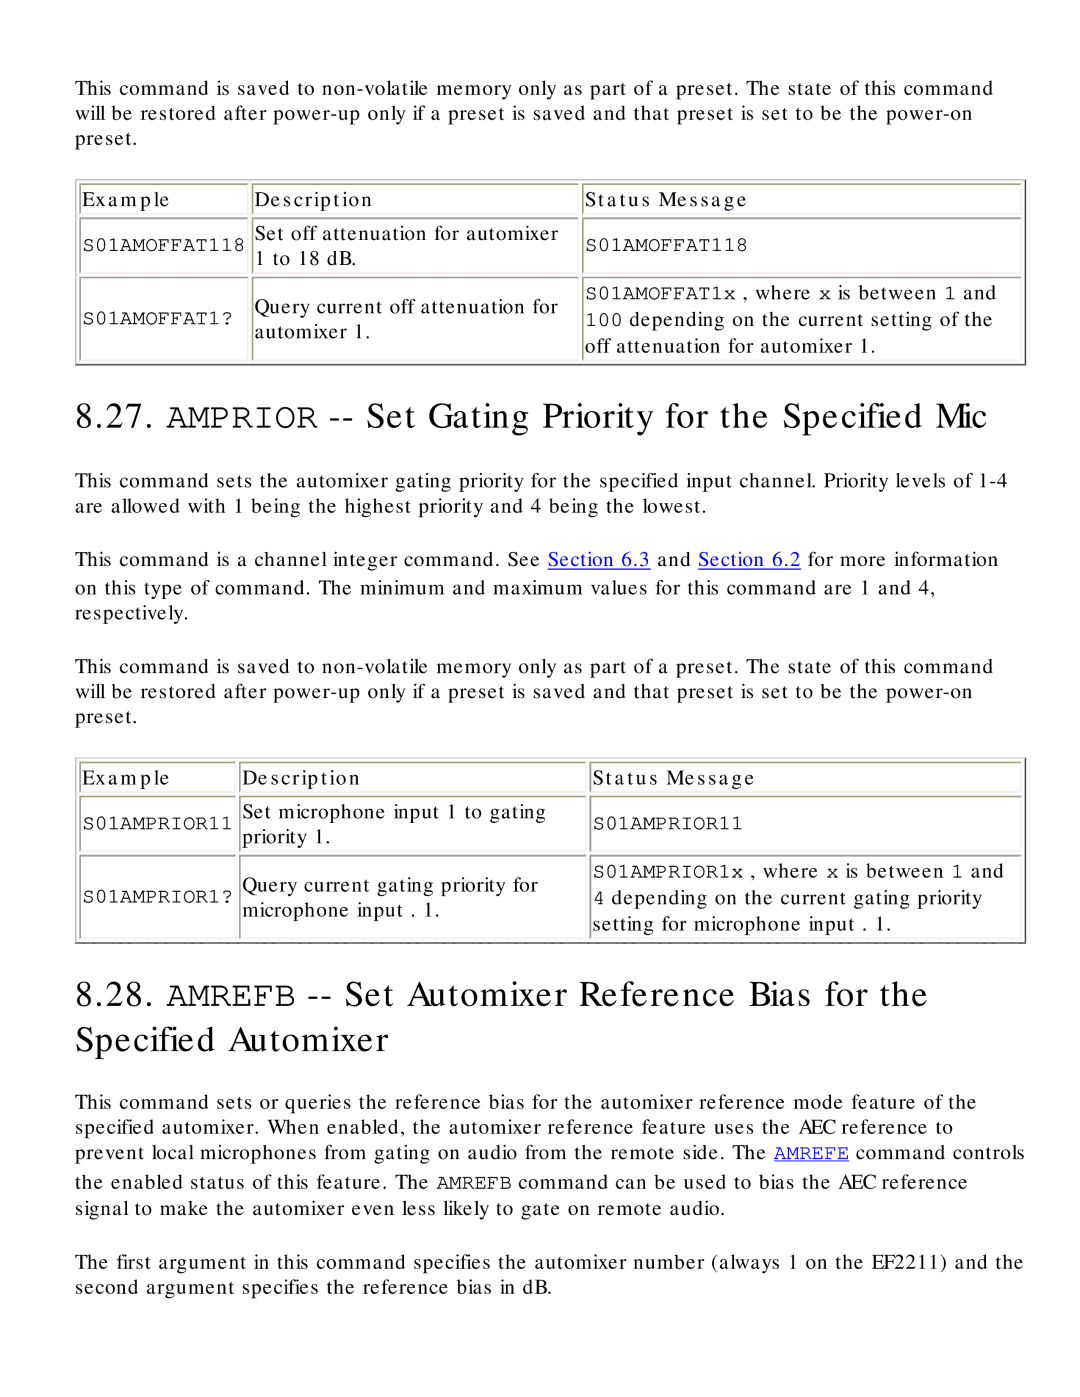 Polycom RS-232 manual Amprior -- Set Gating Priority for the Specified Mic 